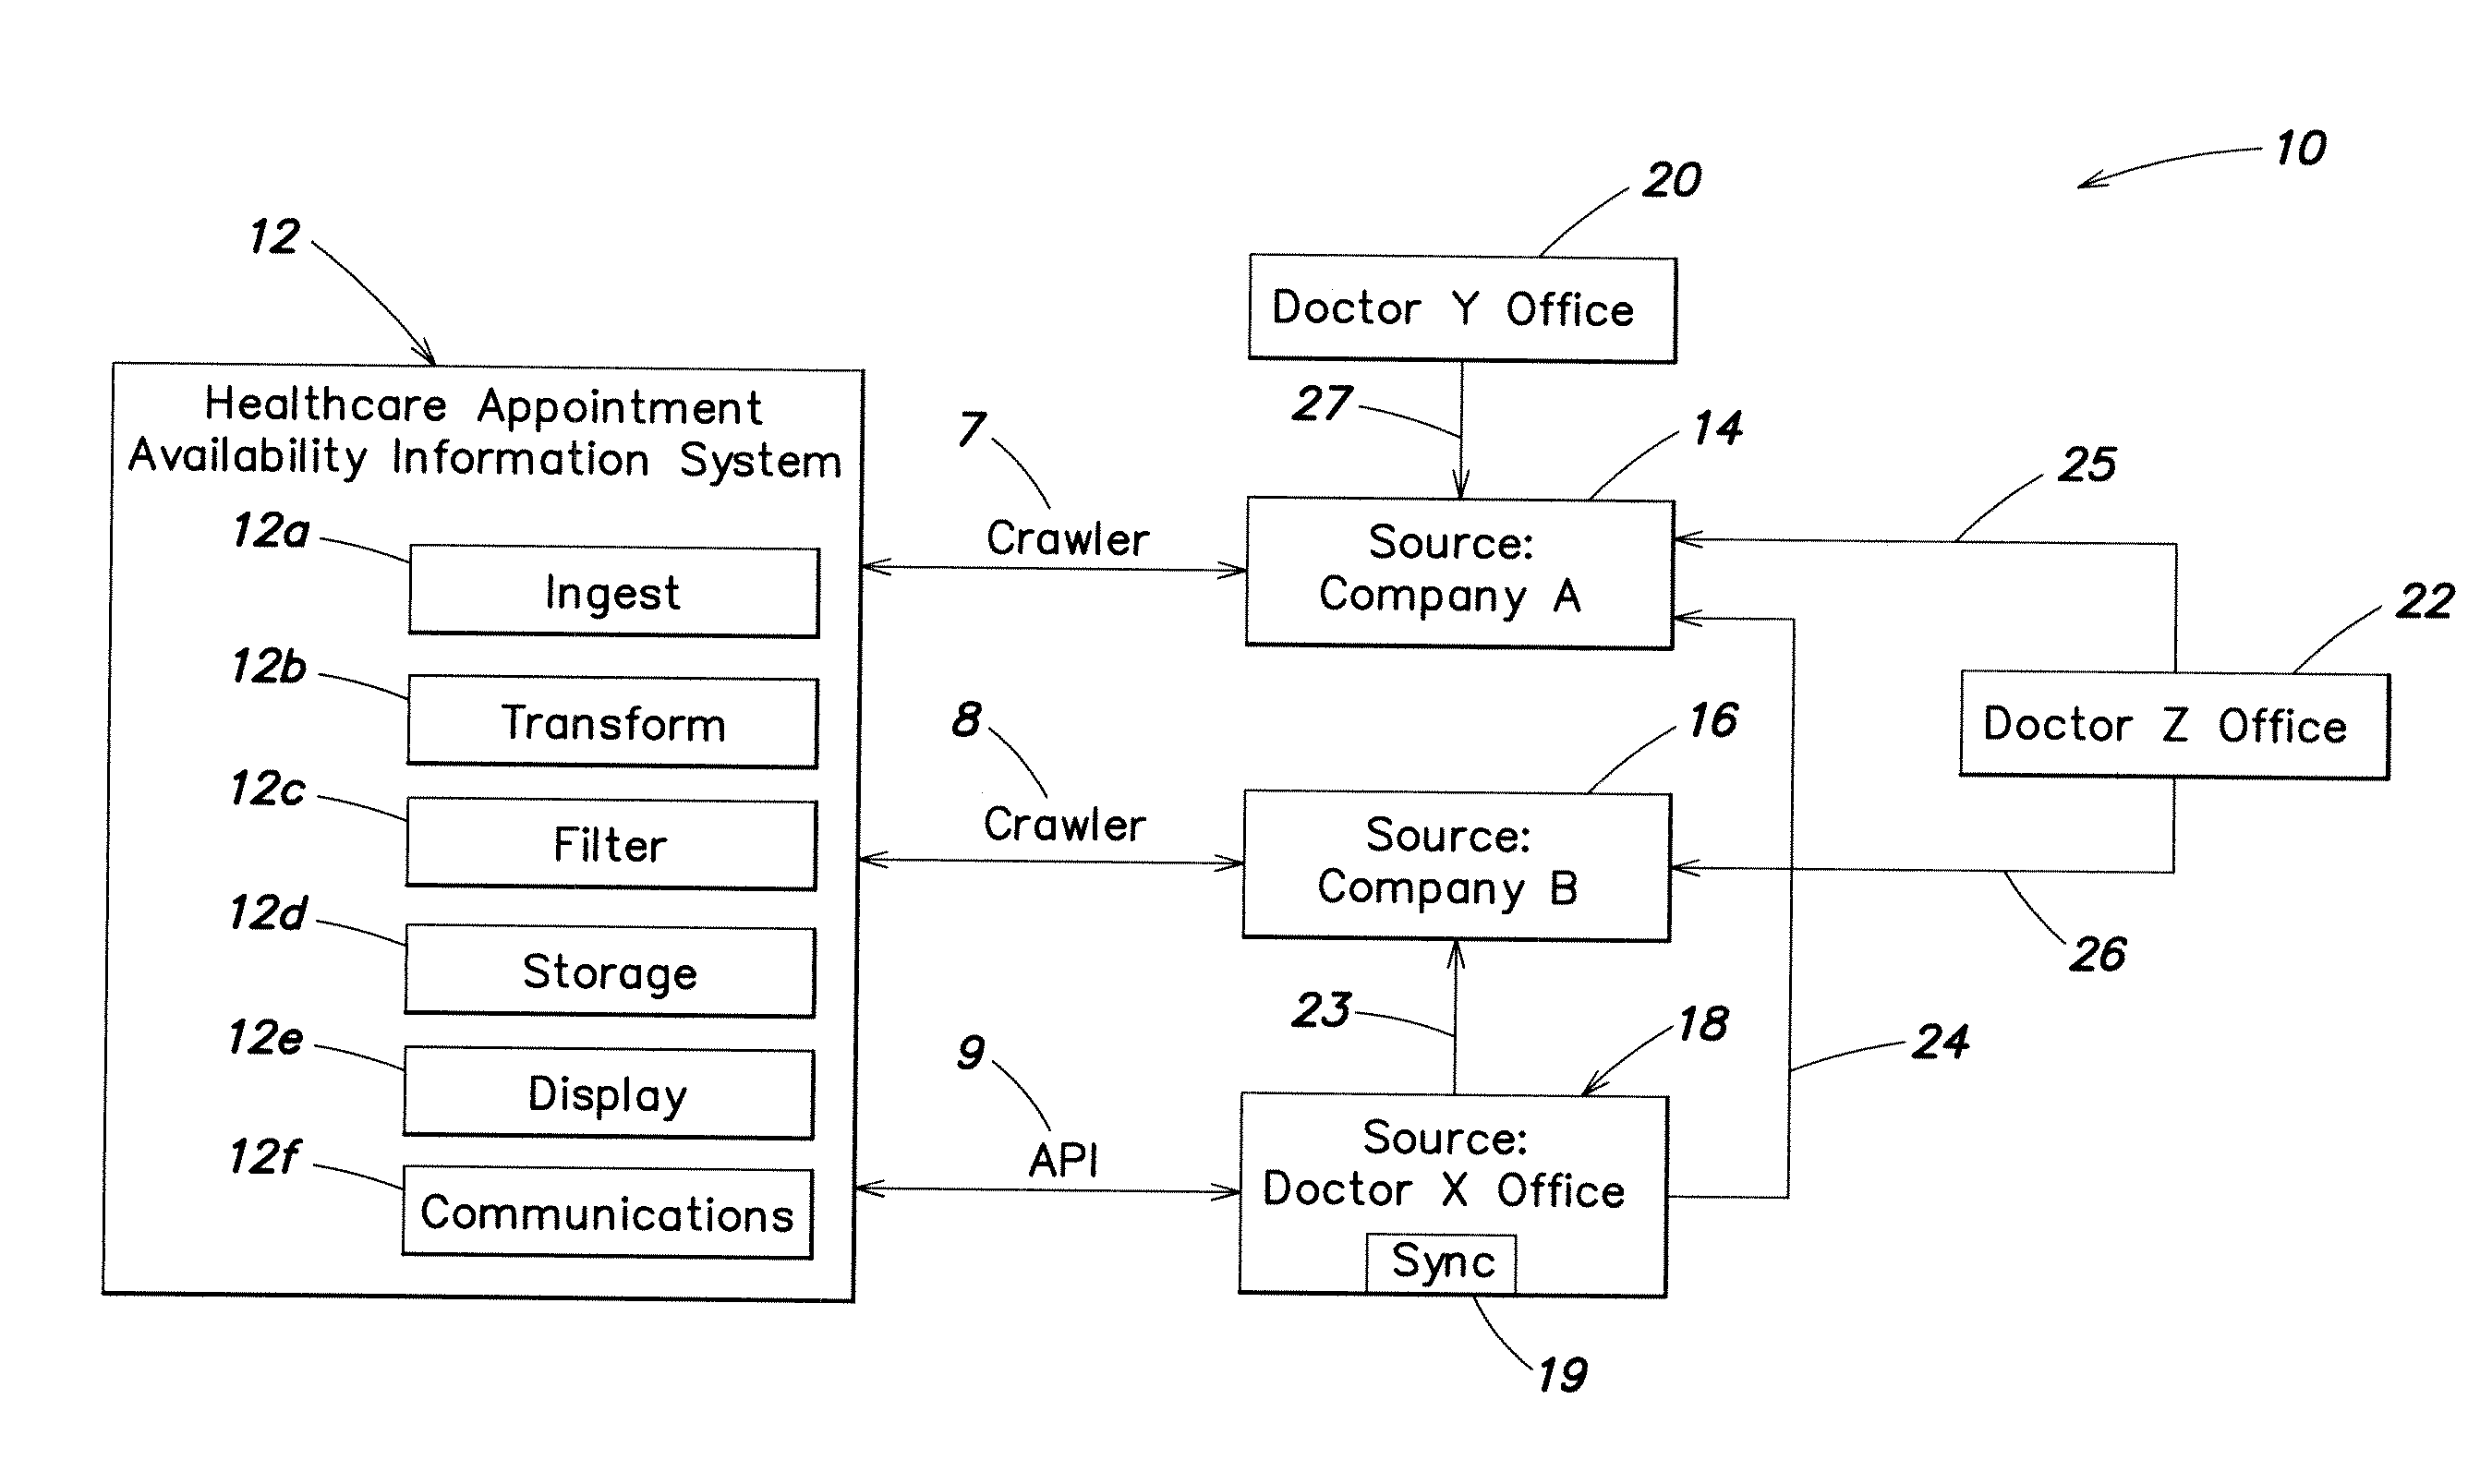 System and method for accessing healthcare appointments from multiple disparate sources